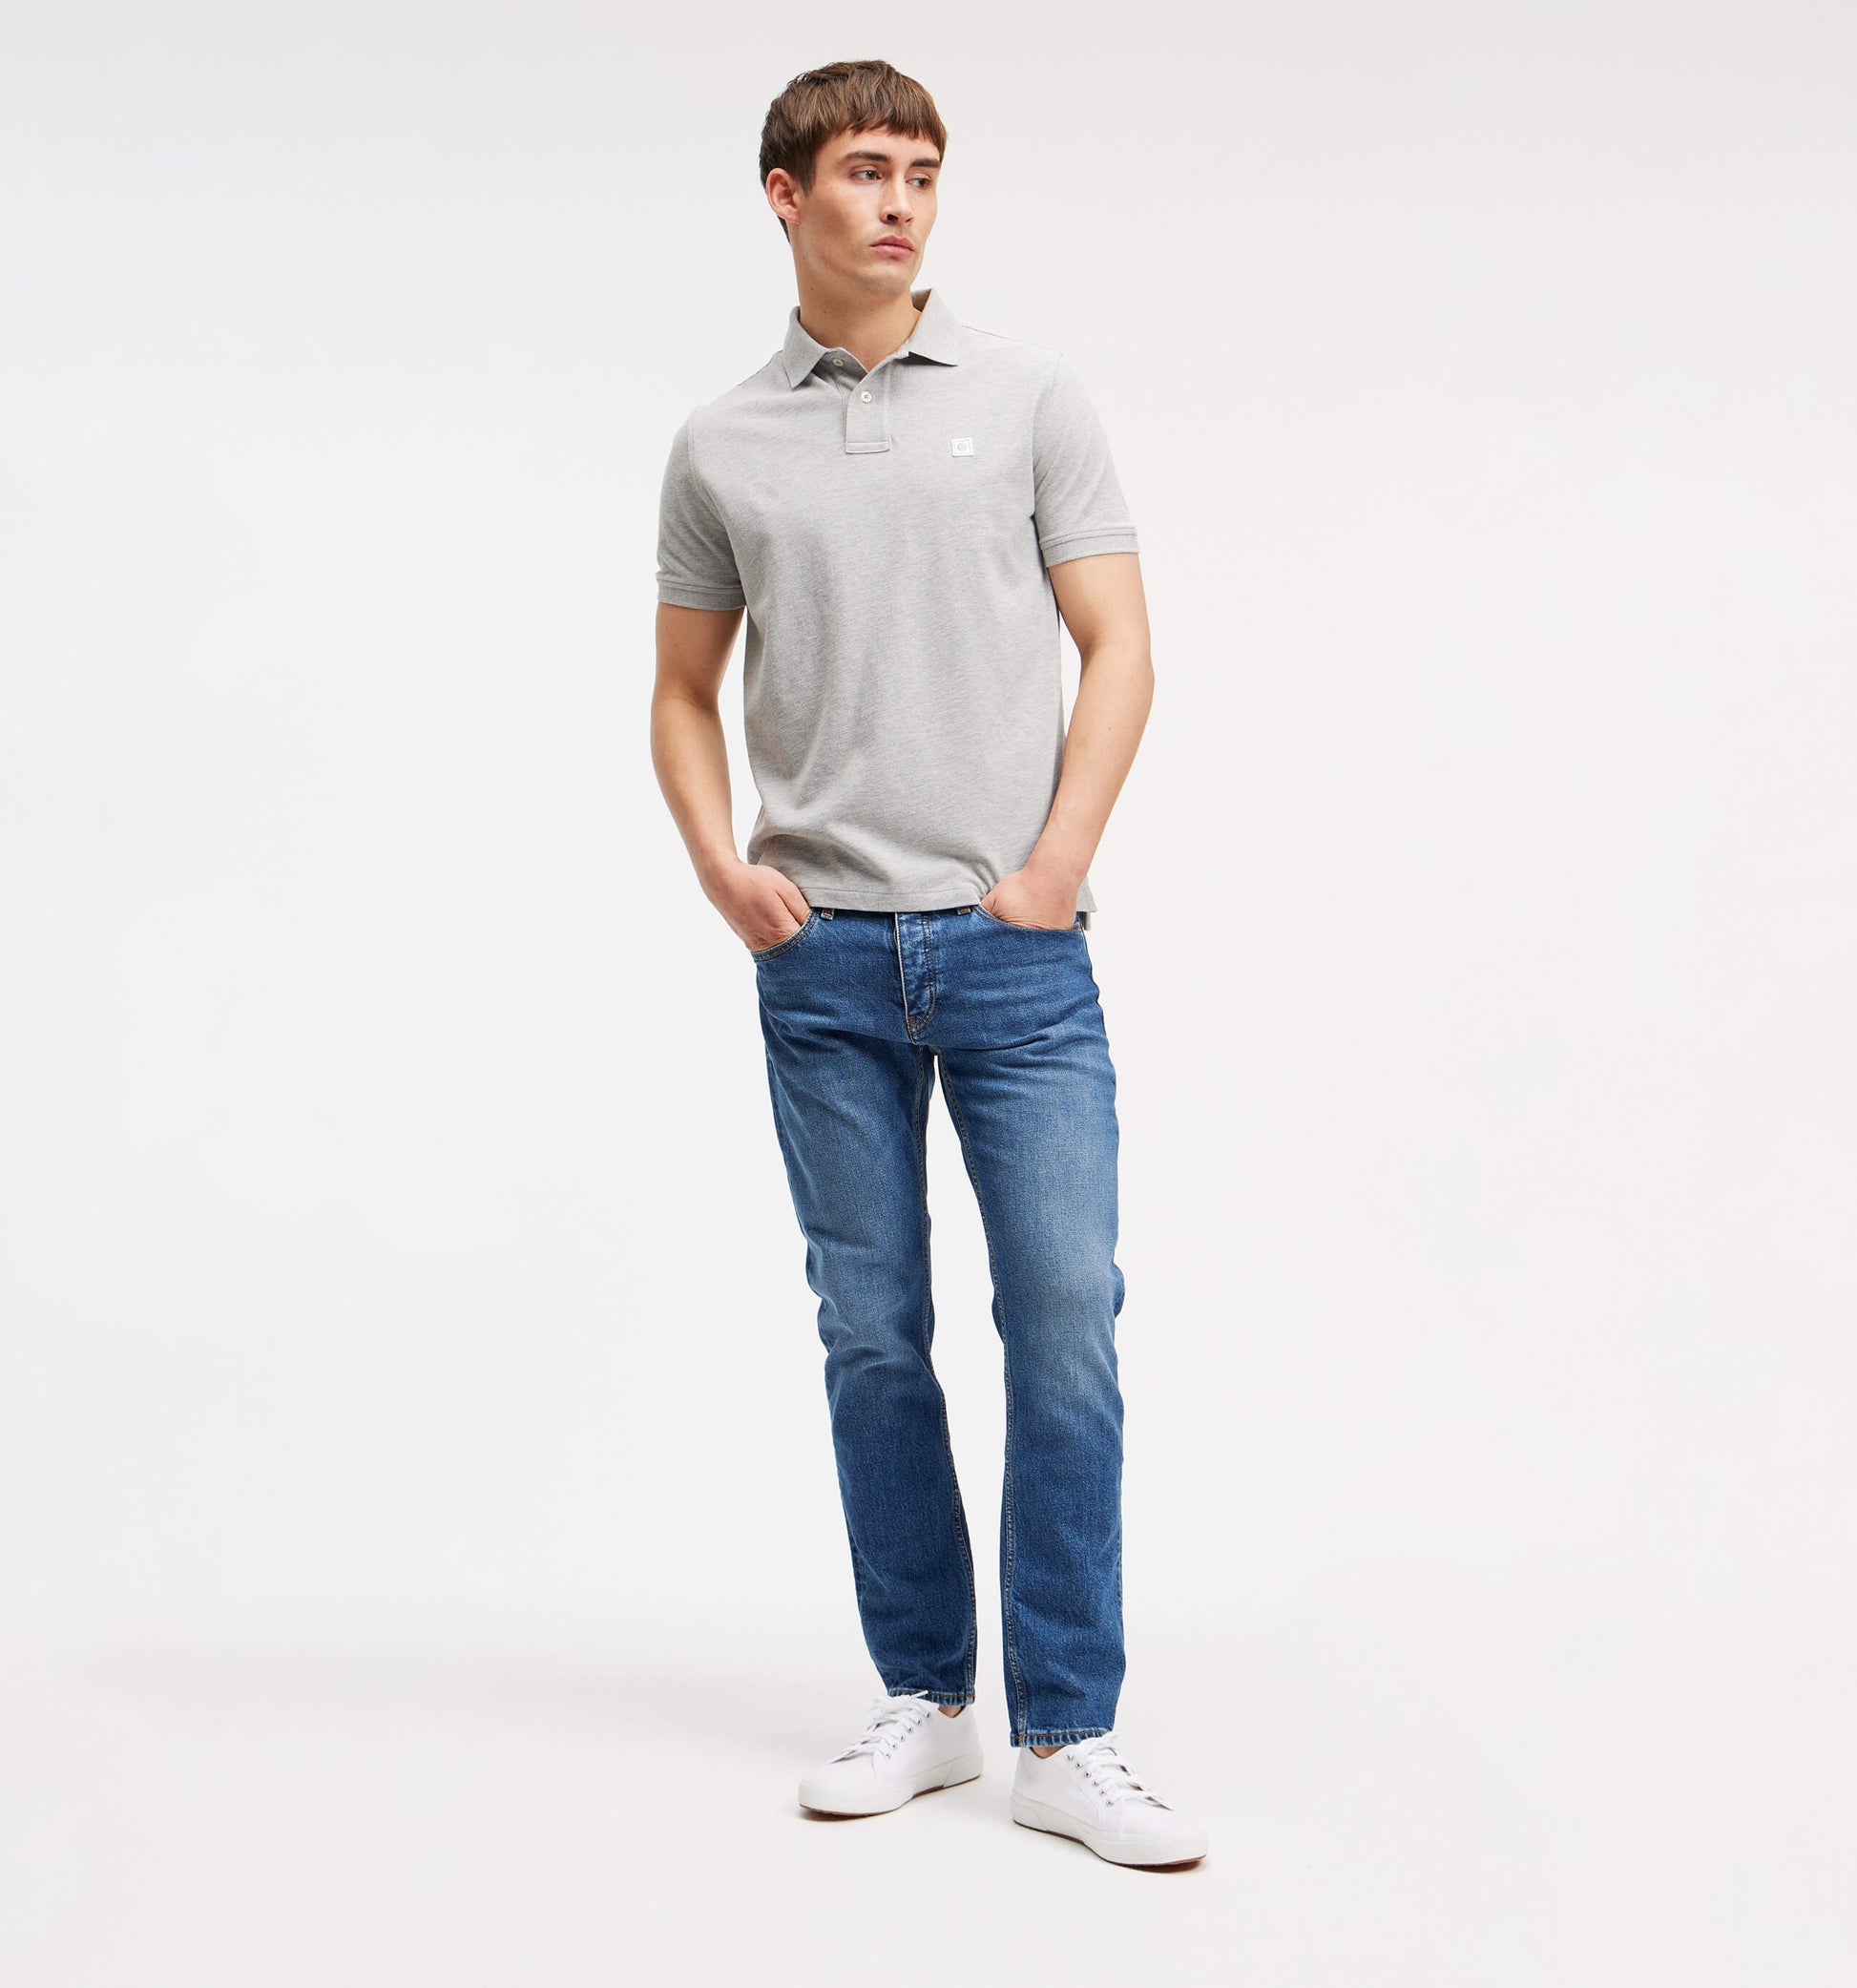 The Rene - Pique Polo In Grey From King Essentials